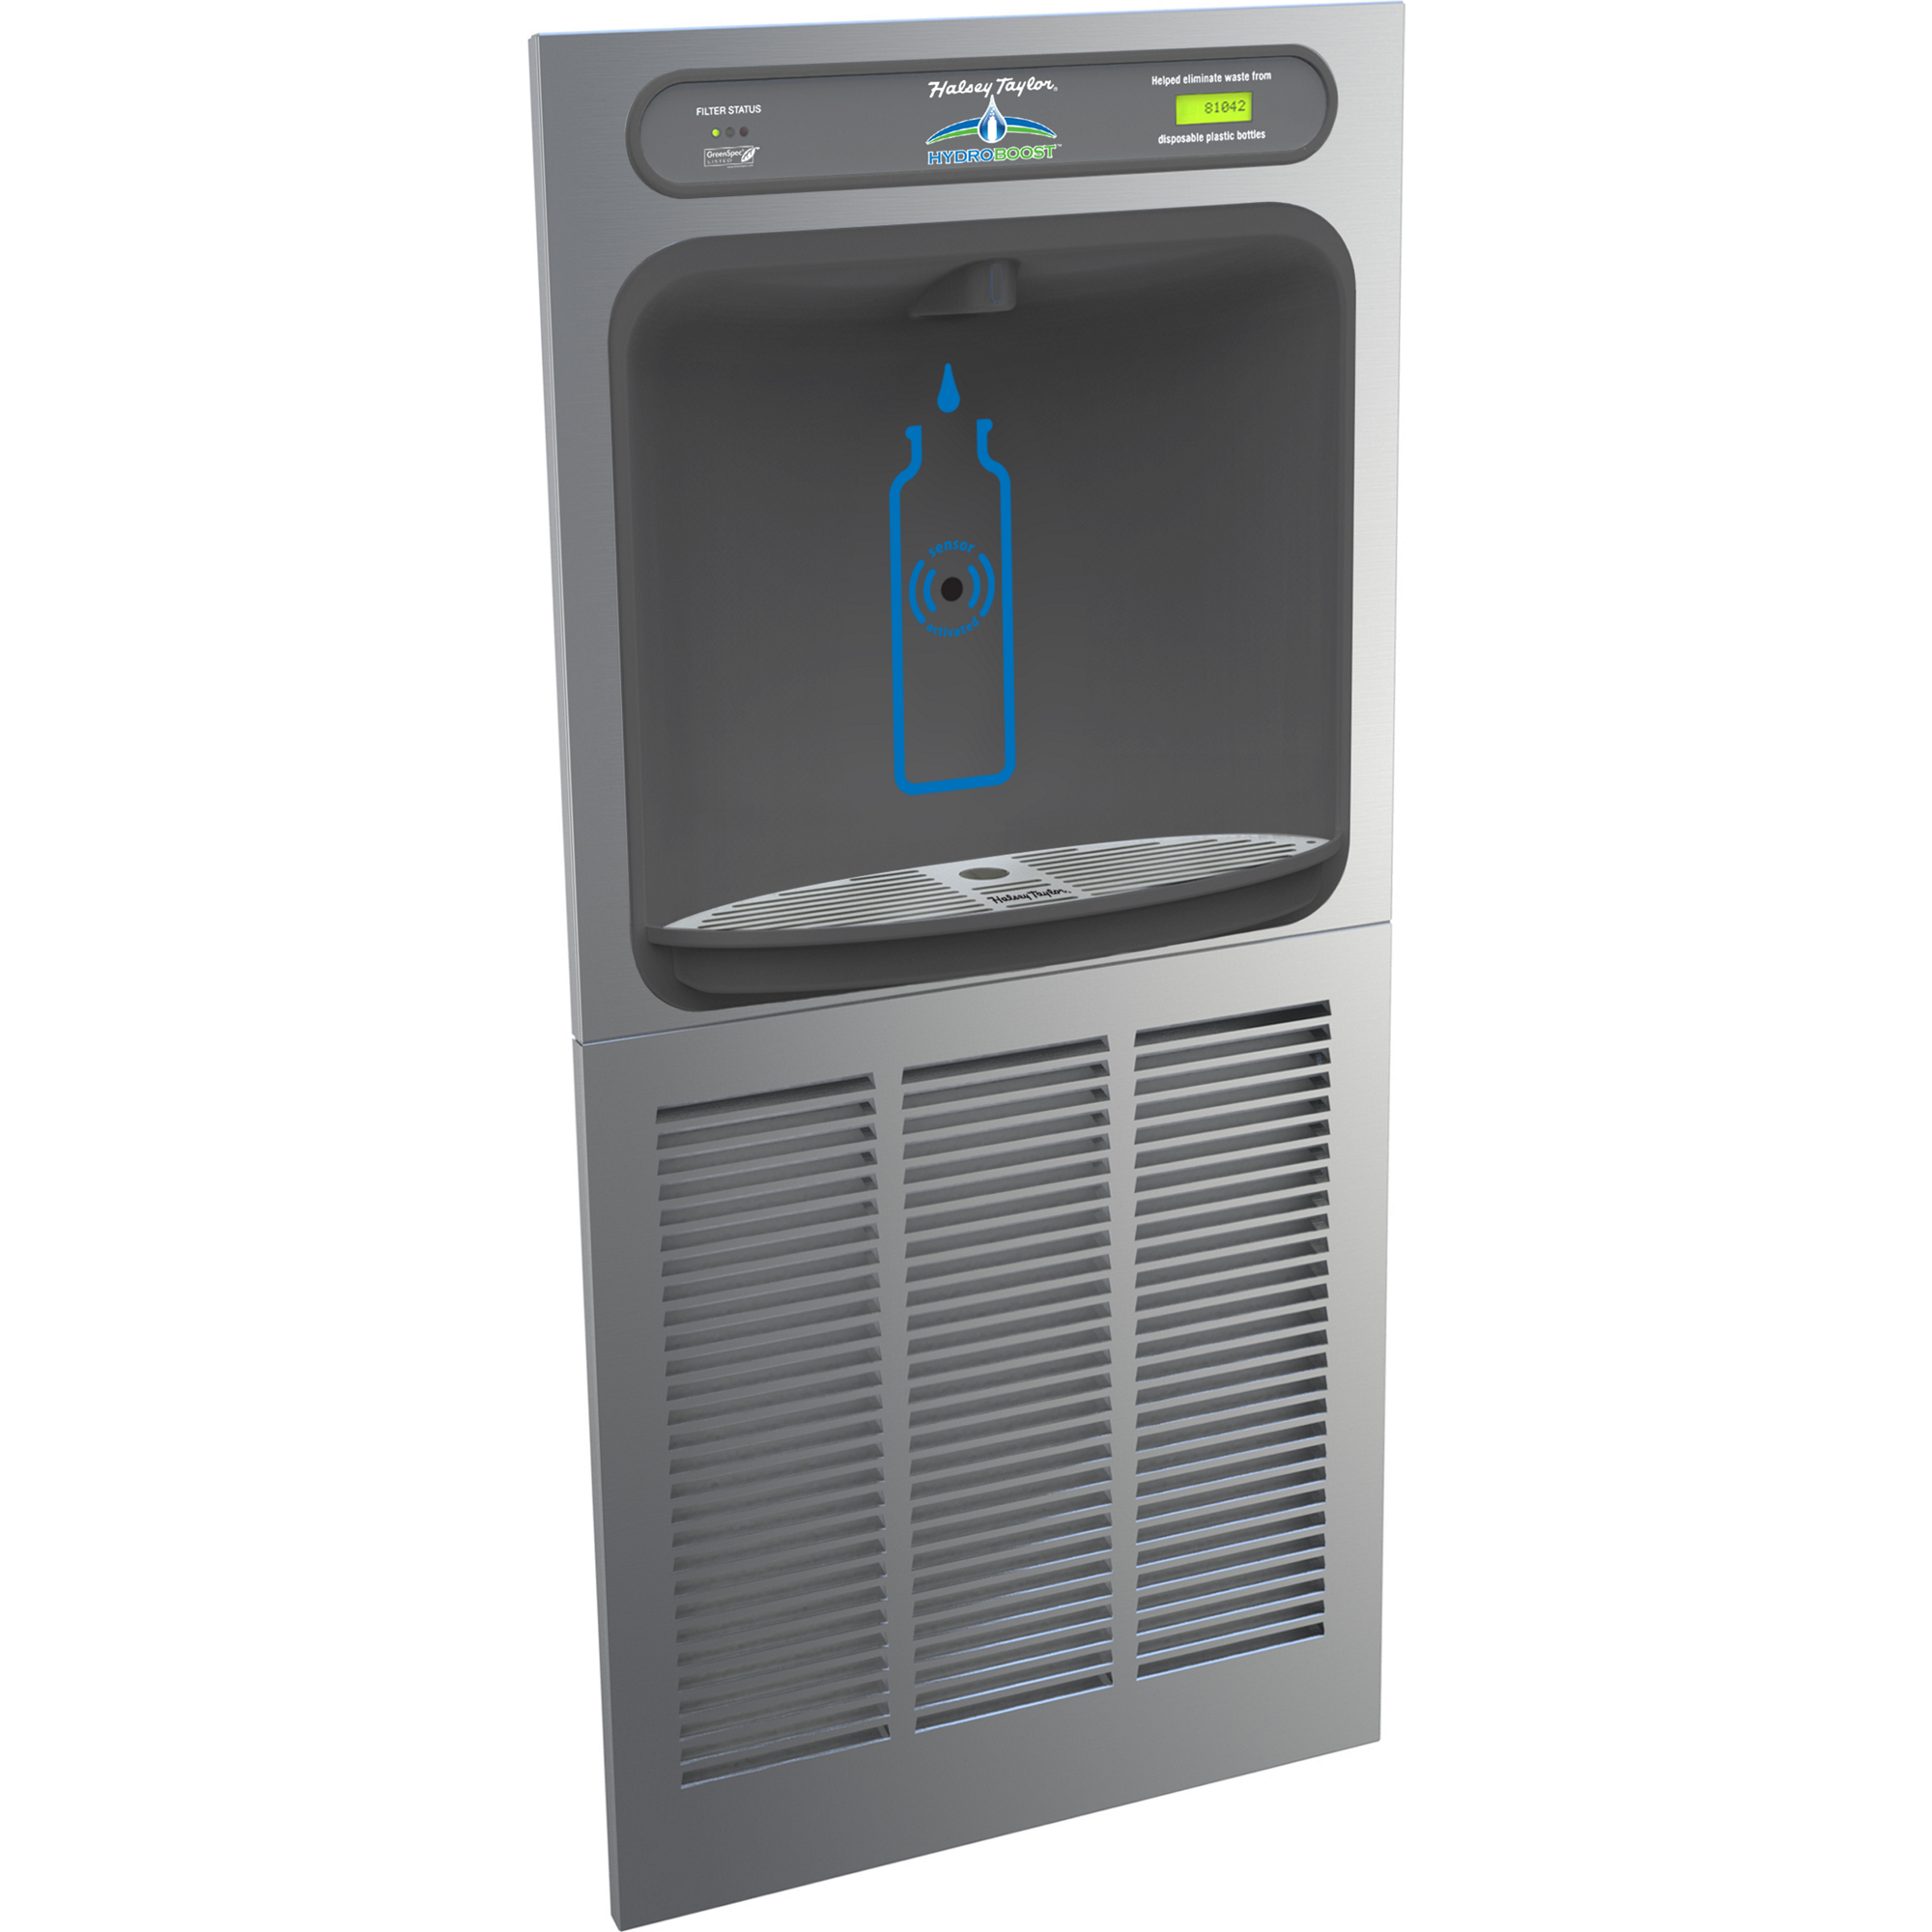 Halsey Taylor HTHB8-WF | In-wall Bottle Filler | Filtered, Refrigerated, Hands-free (comes with Mounting Frame)